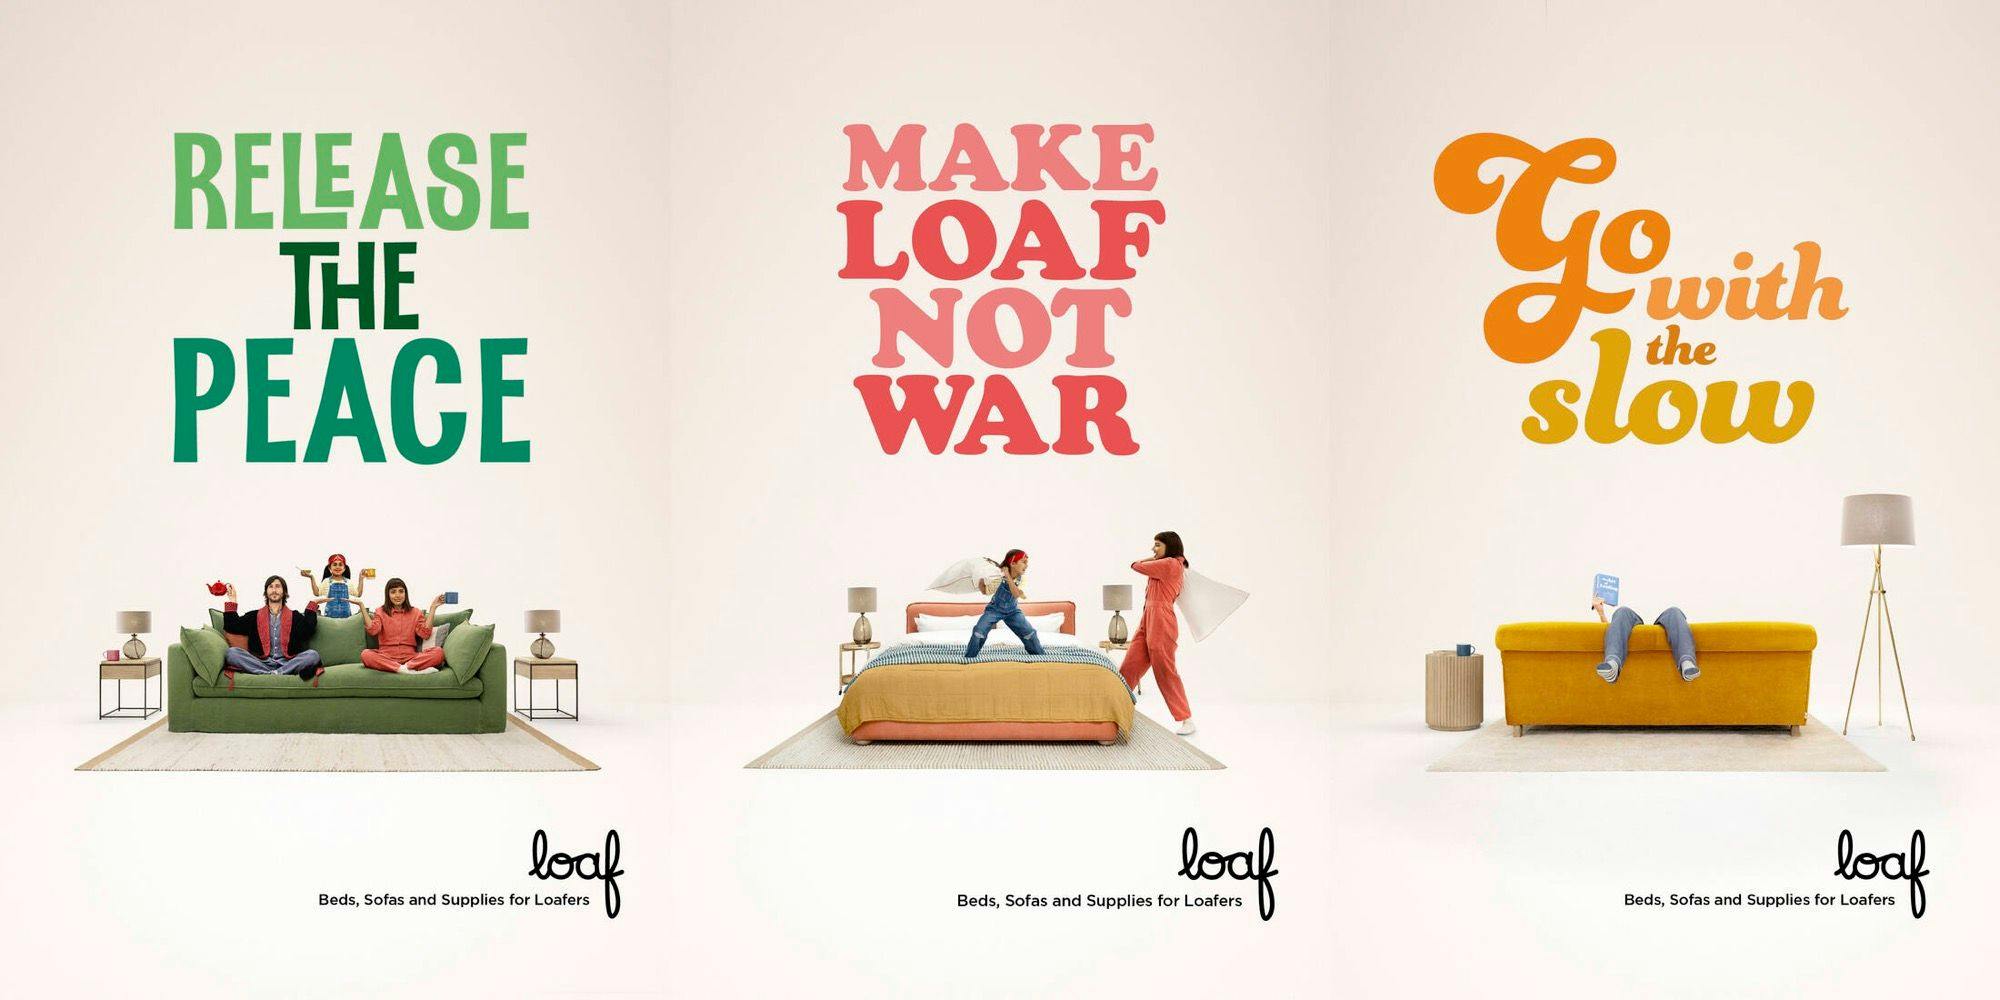 Loaf advertisement posters.